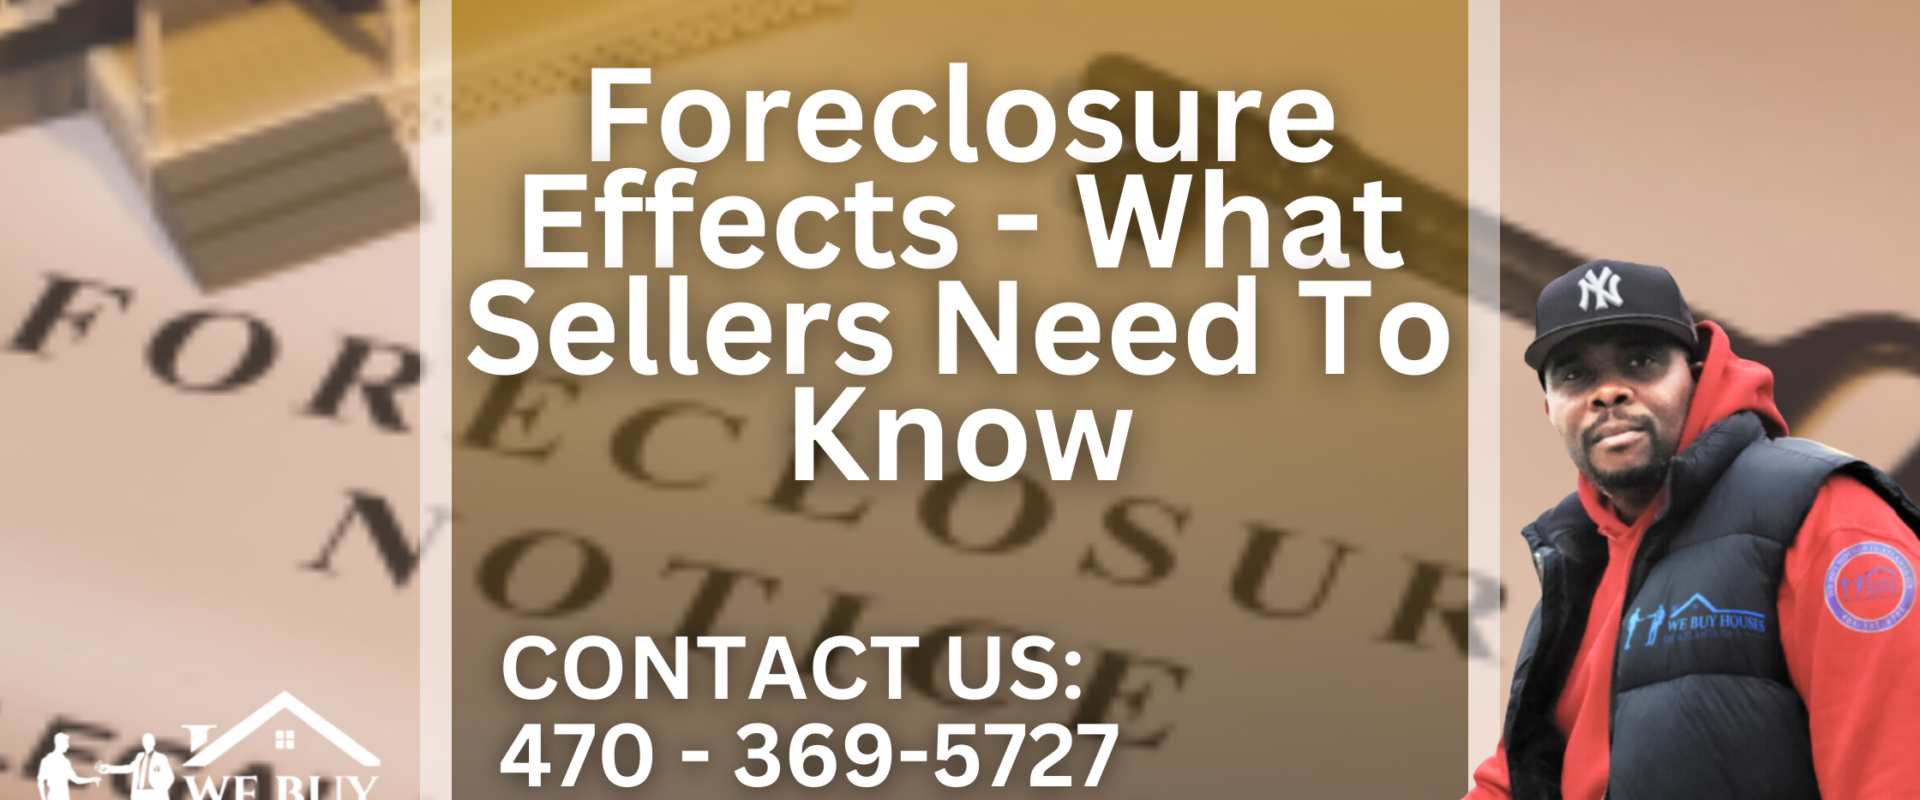 Foreclosure Effects - What Sellers Need To Know